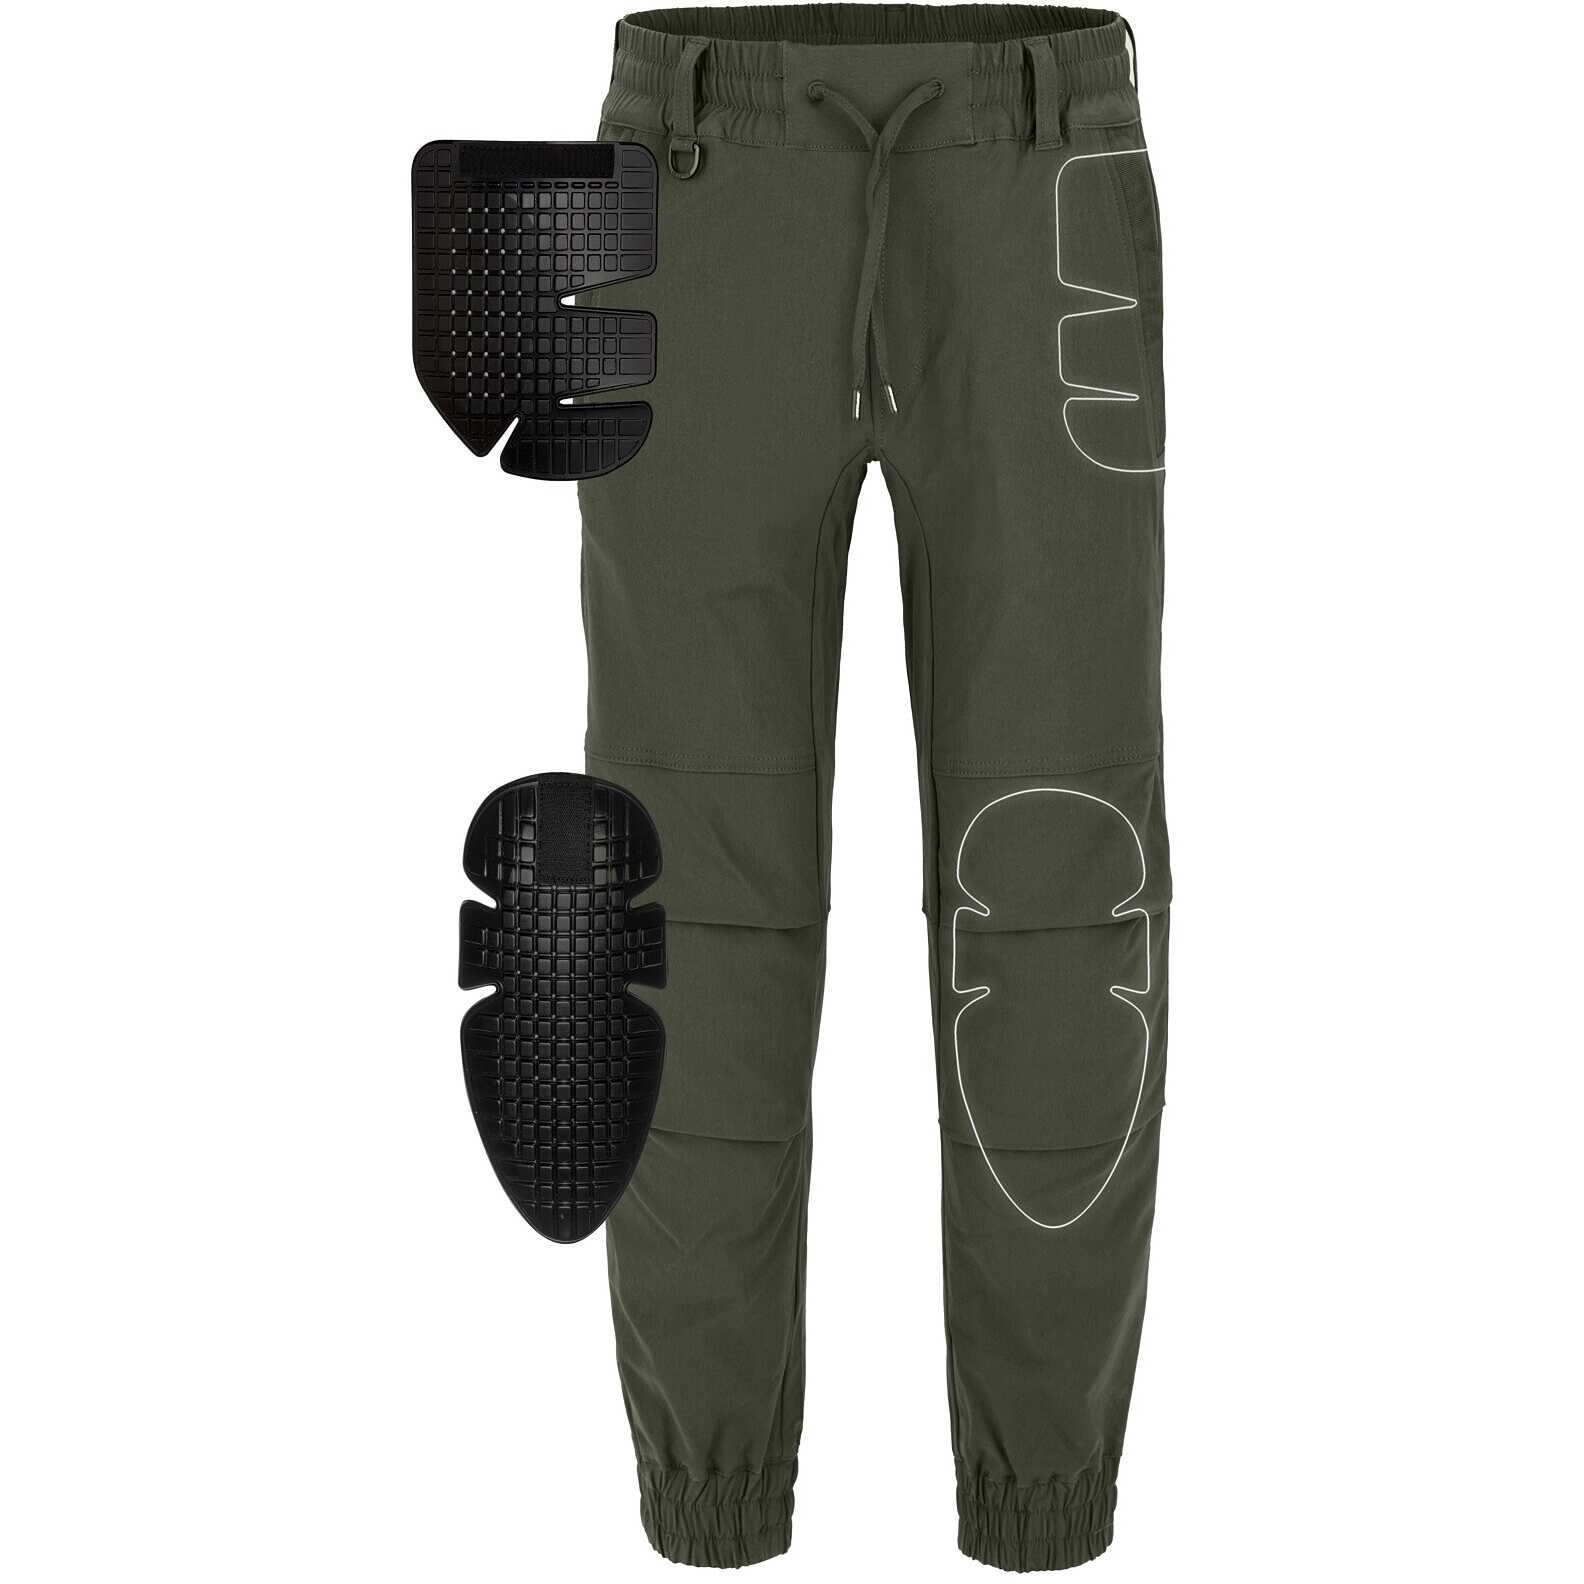 Spidi MOTO JOGGER Military Motorcycle Pants For Sale Online